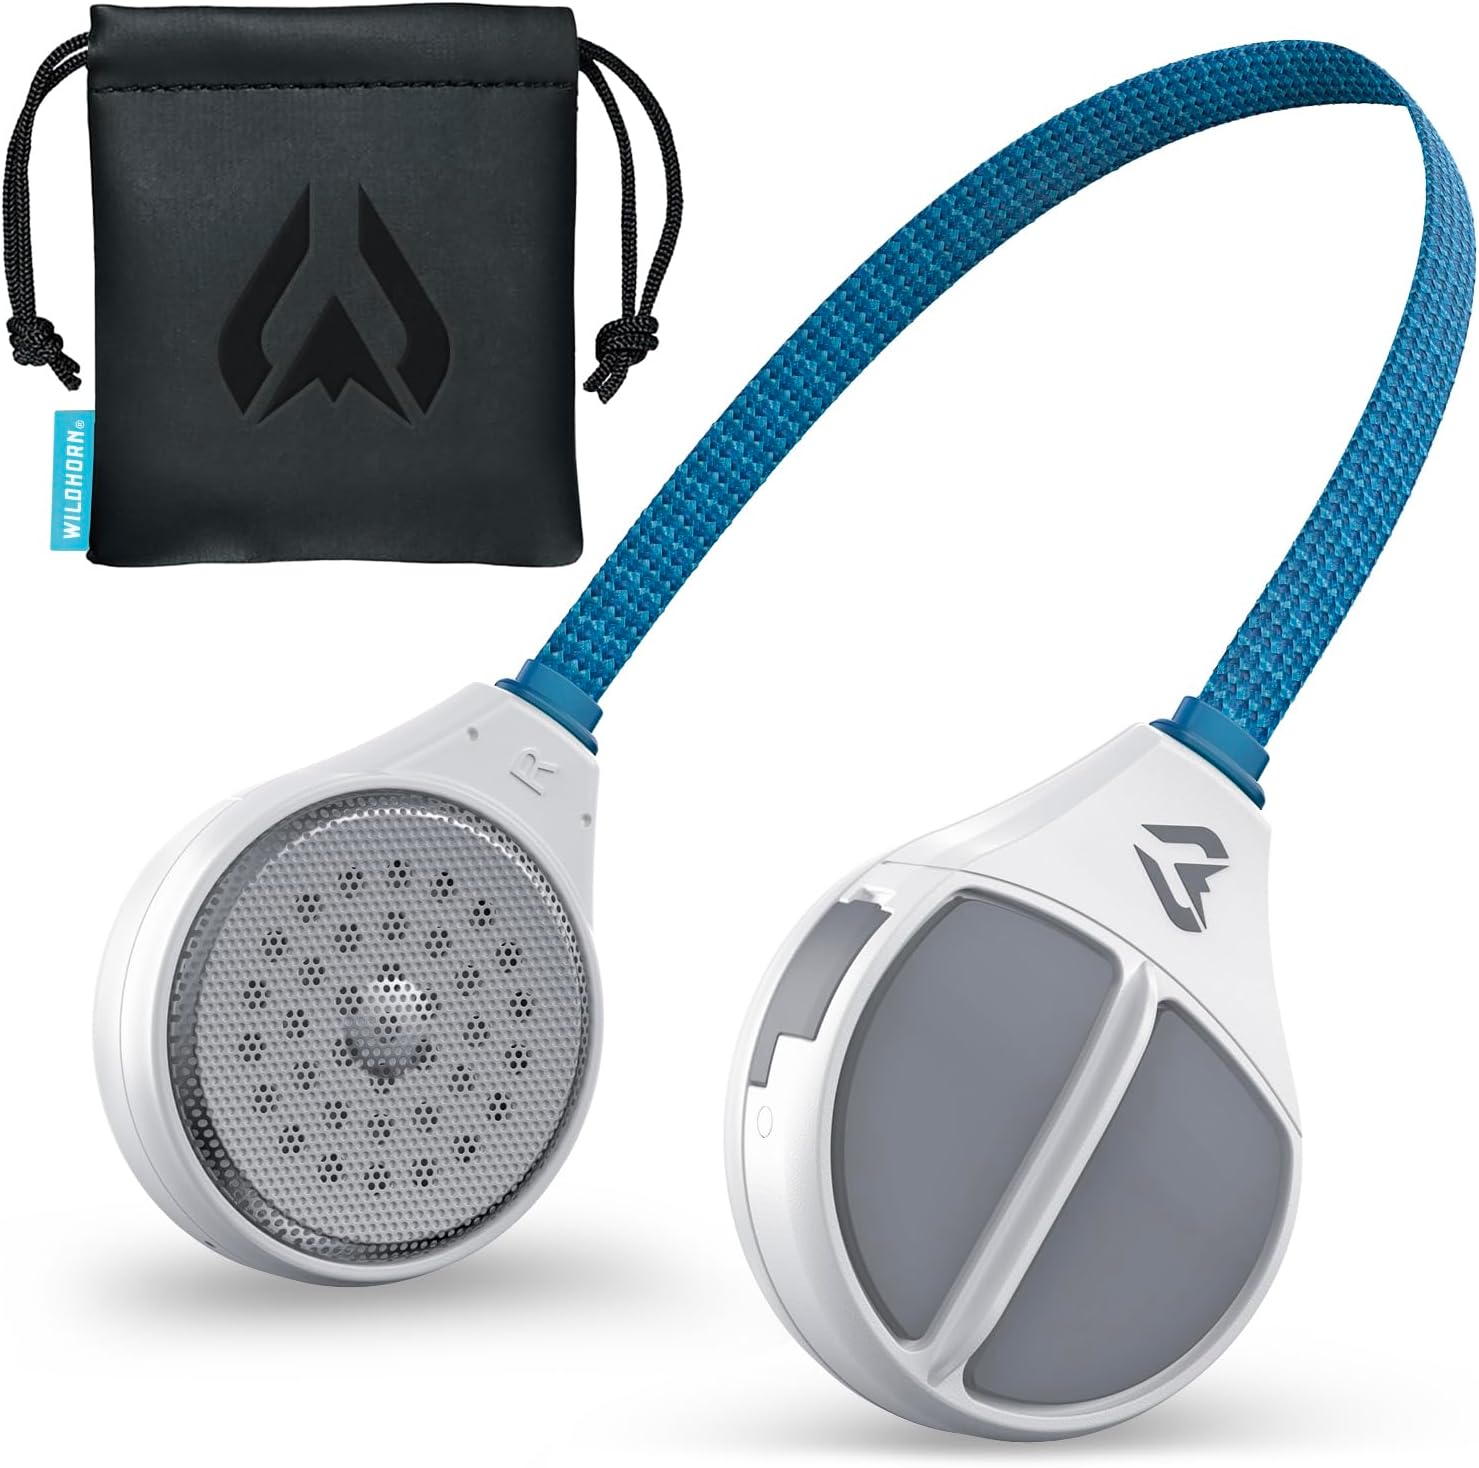 Wildhorn Alta Drop-in Headphones Review: Experience Premium Audio on the Slopes